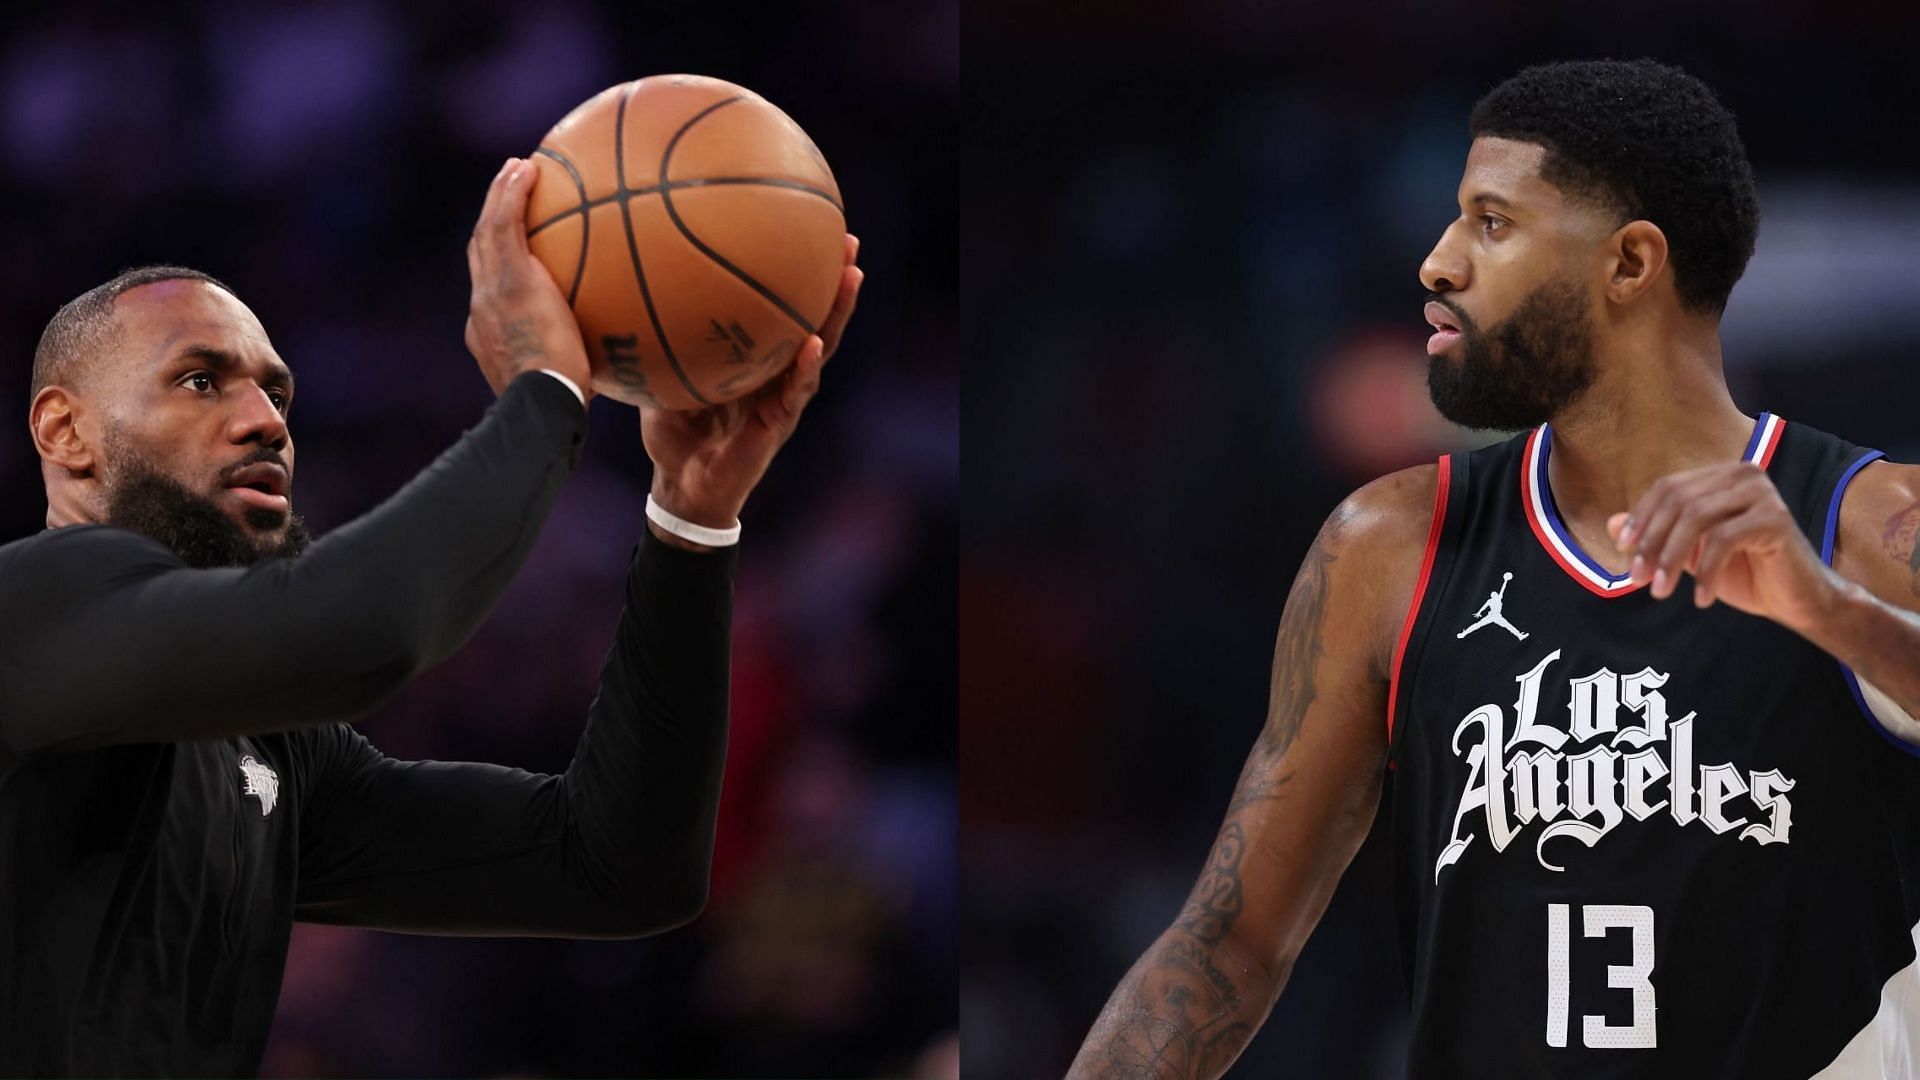 Paul George says meeting with LeBron James in his house changed his life